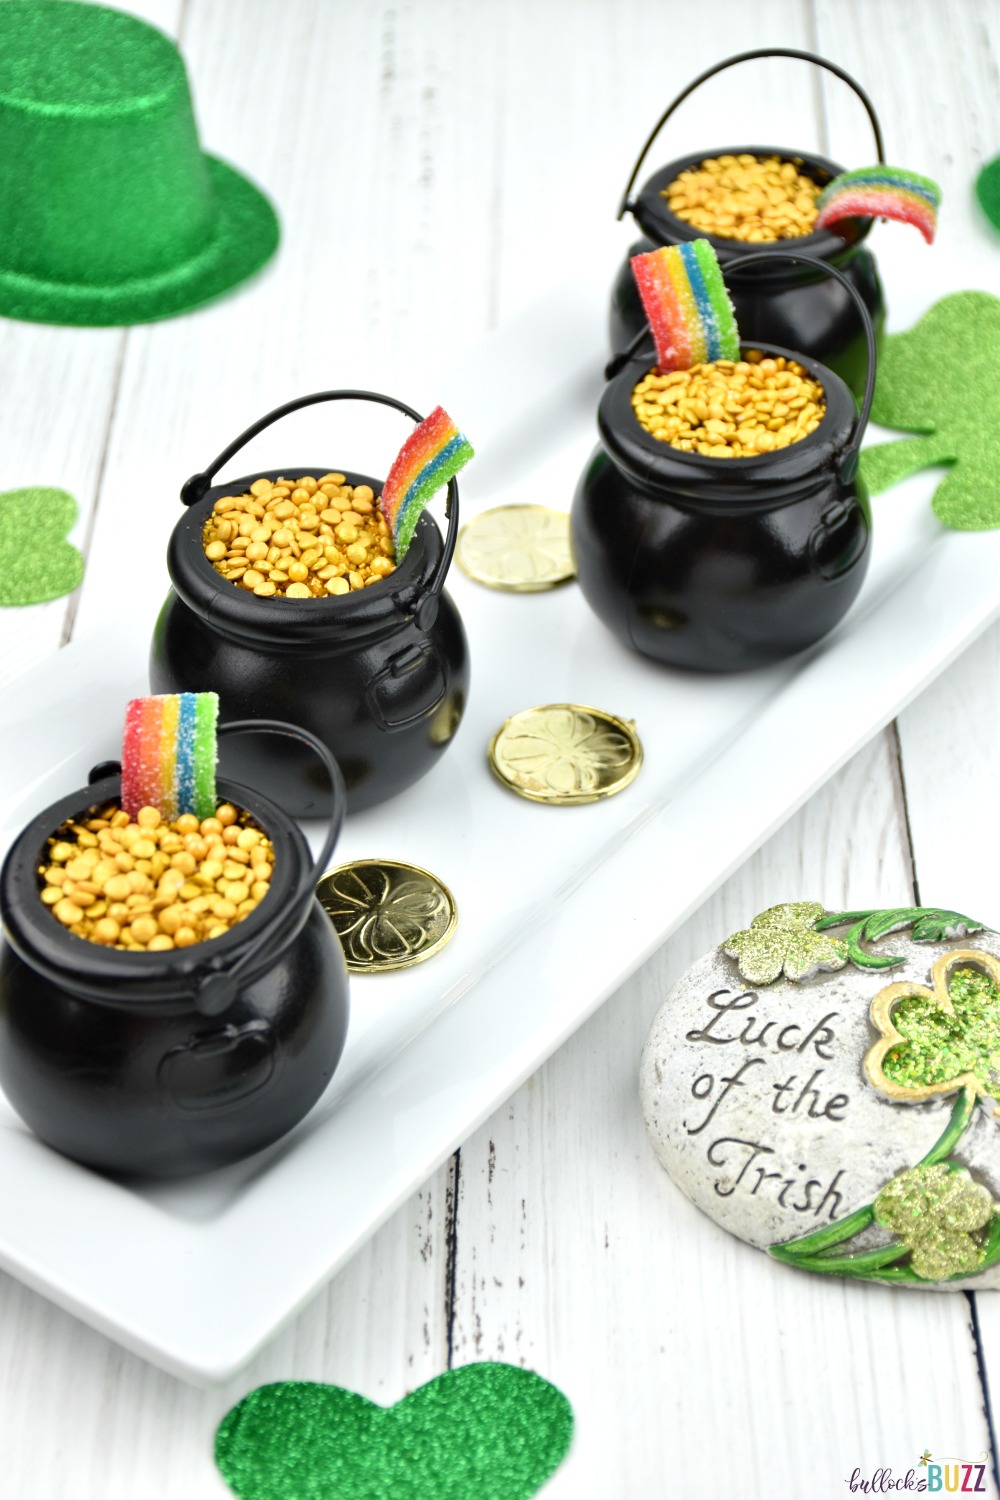 Grab your pudding mix, oreo crumbs, sprinkles, and rainbow candy and get ready to create the cutest St. Patrick's Day treats ever. with this Cup of Gold Dirt Cup recipe! #recipes #StPatricksDay #bullocksbuzz